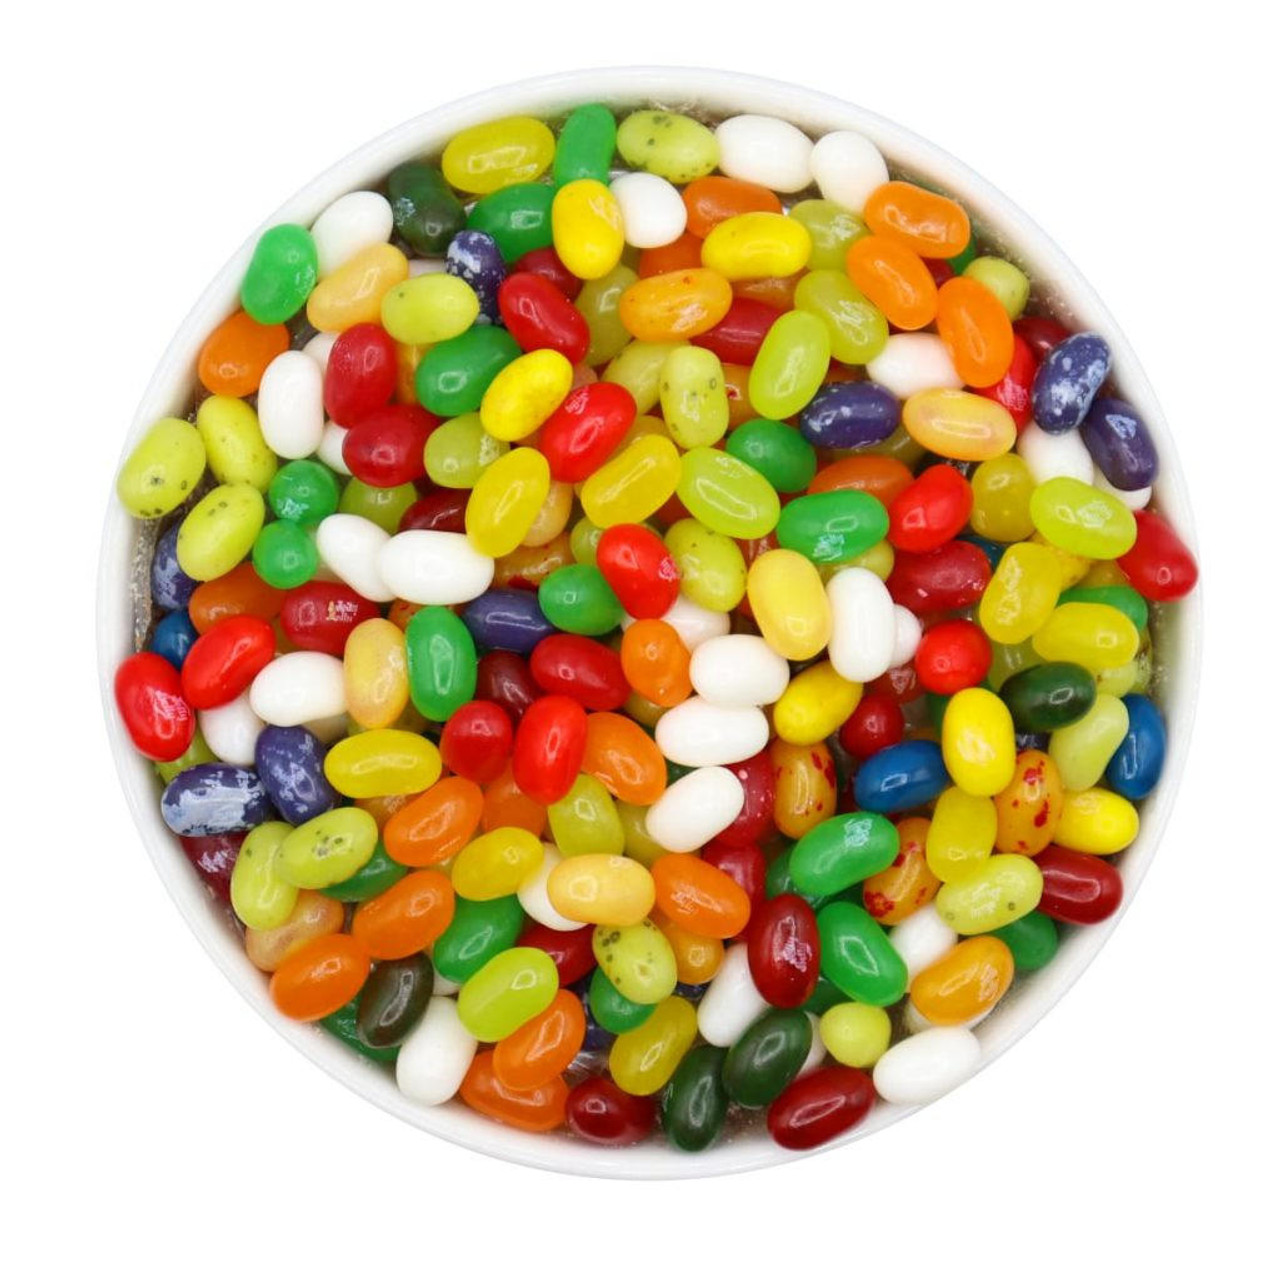 A2ZCHEF Jelly Belly, Fruit Bowl (Jelly Beans) - 20 lb. Case 